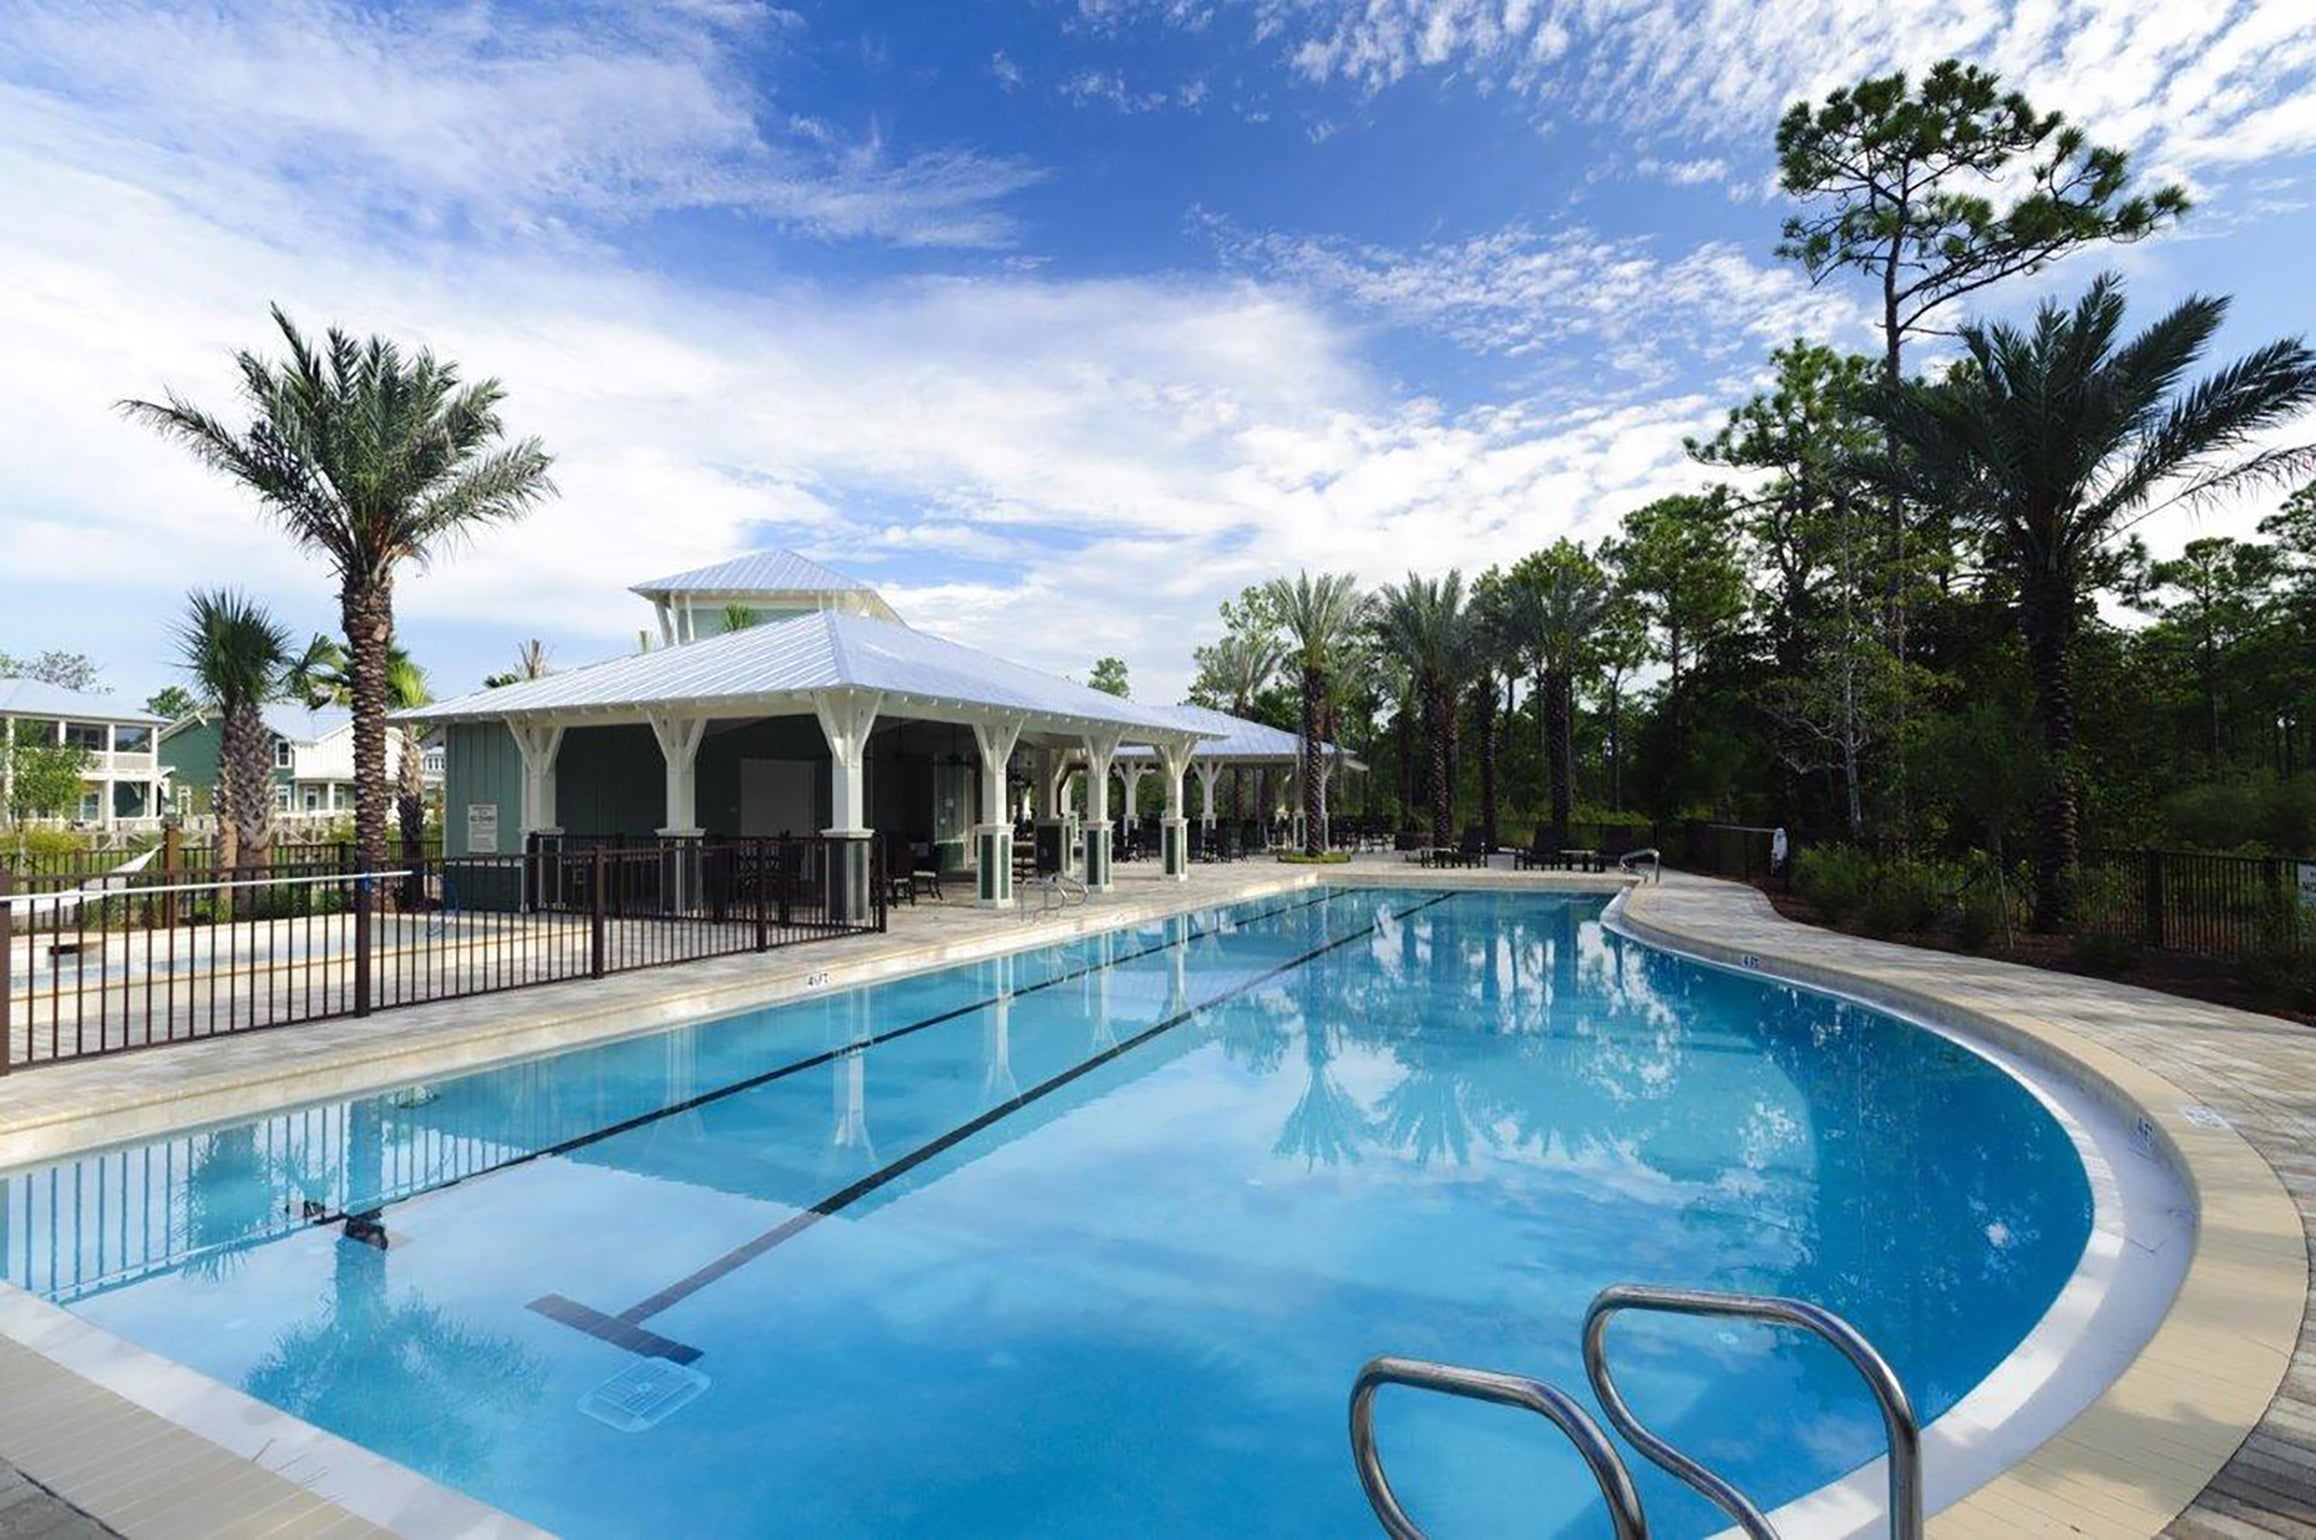 Swim some laps in the heated pool!